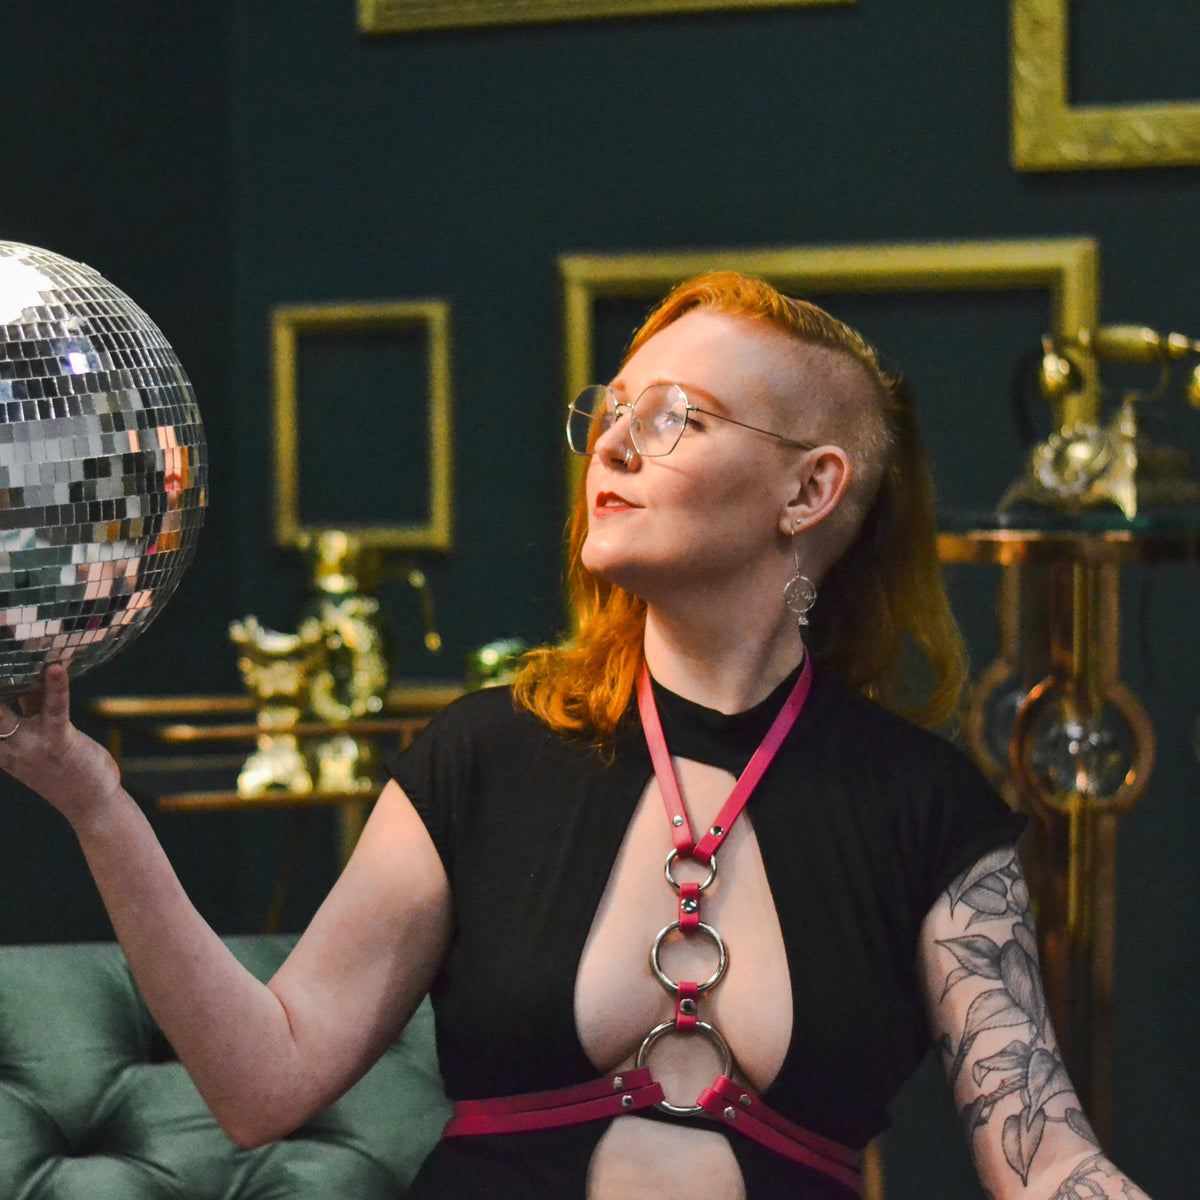 Woman with red hair wearing a magenta circles waist harness while holding a disco ball.